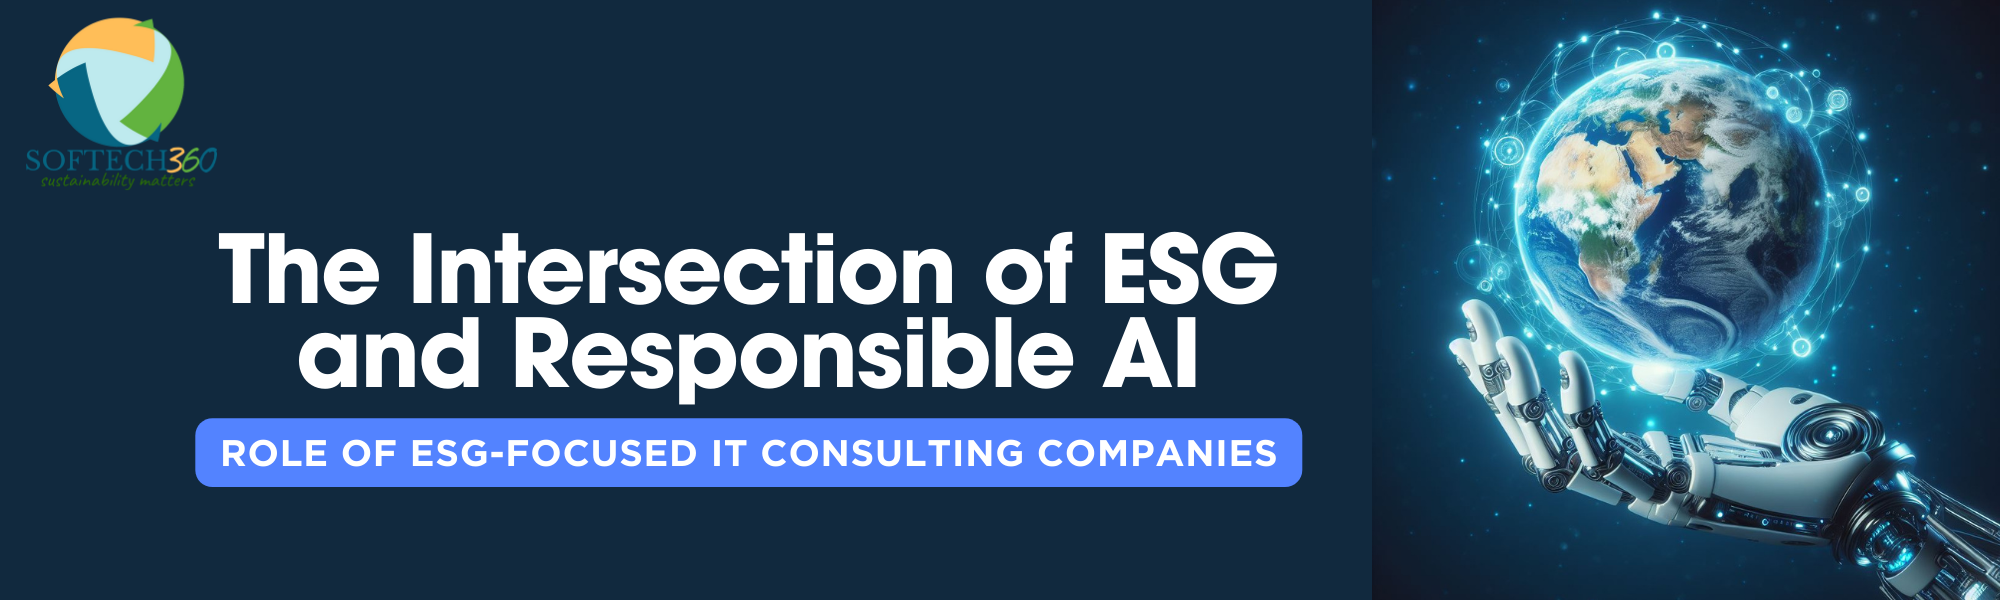 The Intersection of ESG and Responsible AI